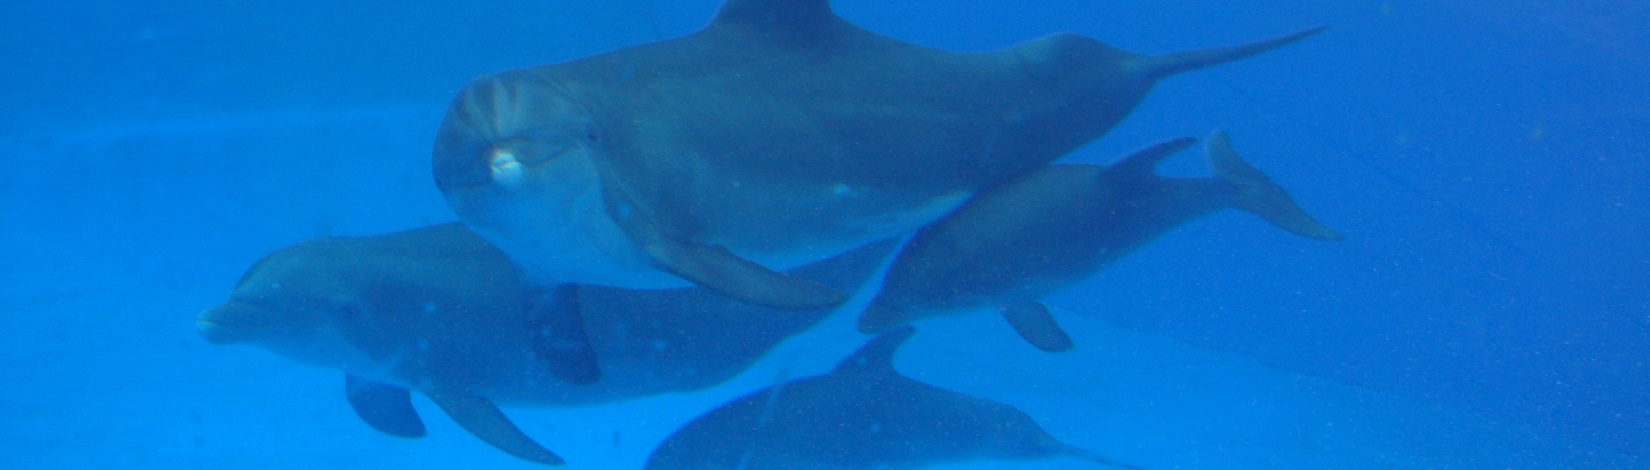 Four grey dolphins swimming underwater